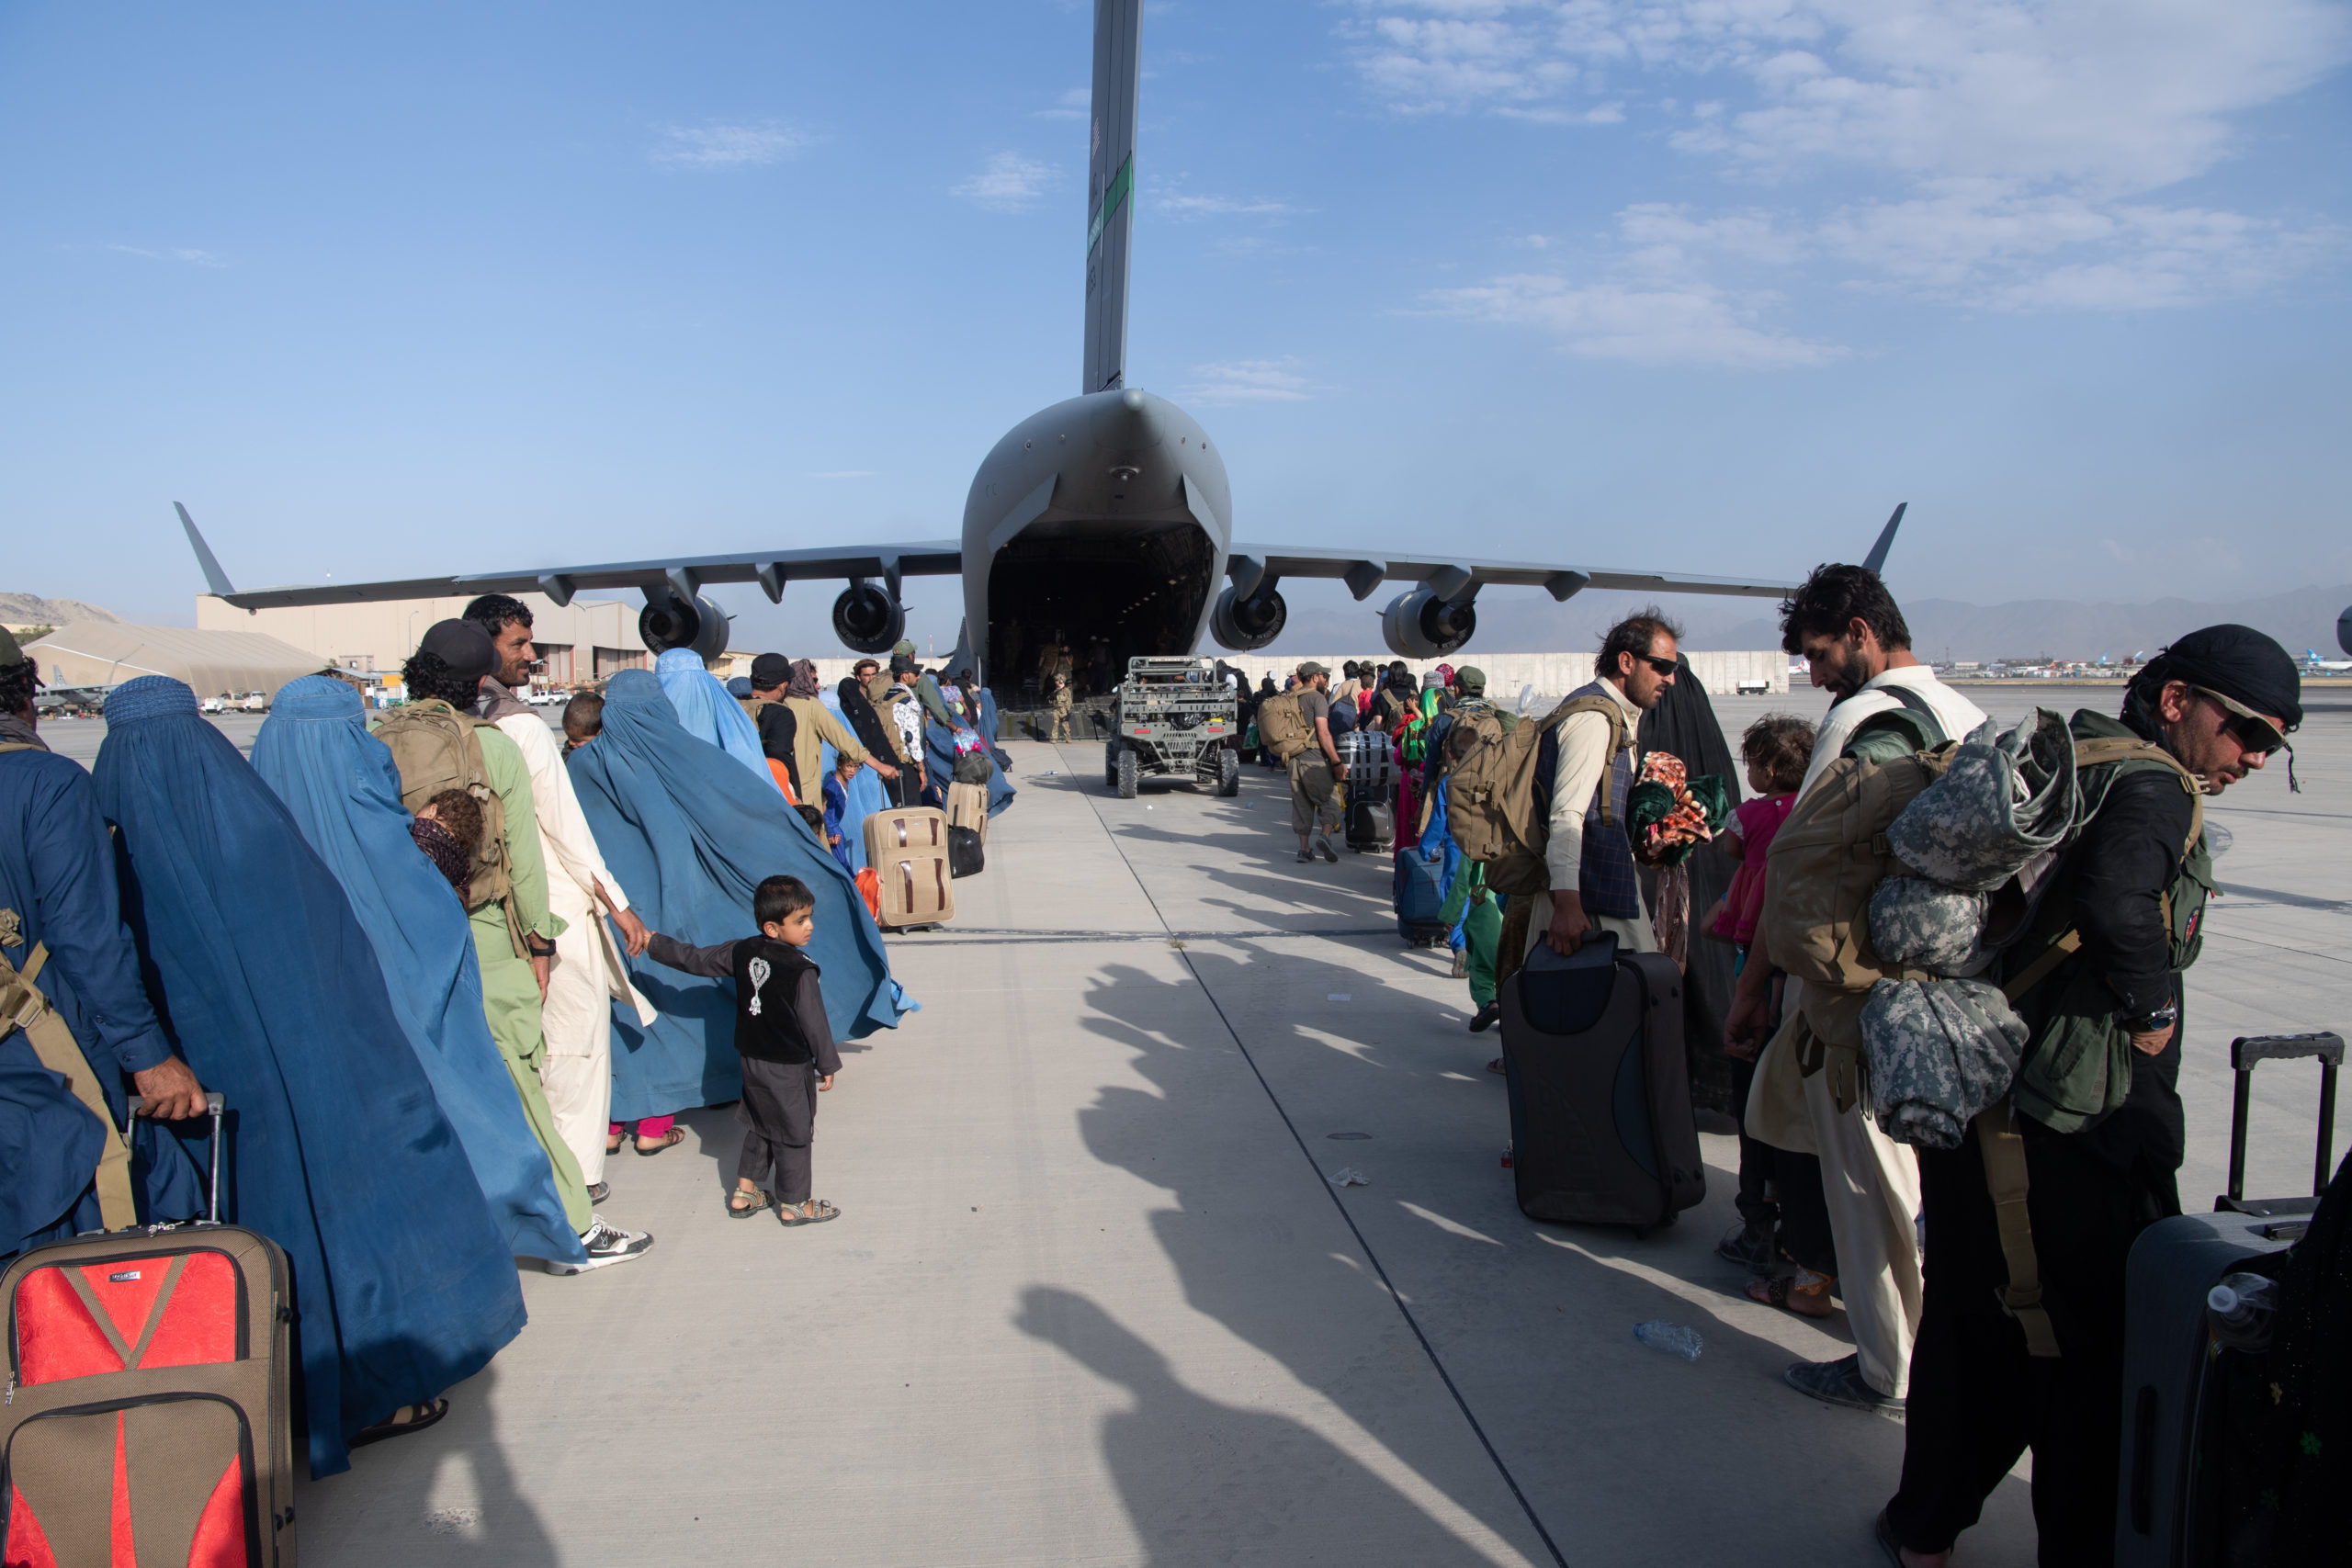 Kabul, afghanistan - august 24: in this handout provided by u. S. Central command public affairs, u. S. Air force loadmasters and pilots assigned to the 816th expeditionary airlift squadron, load passengers aboard a u. S. Air force c-17 globemaster iii in support of the afghanistan evacuation at hamid karzai international airport (hkia) on august 24, 2021 in kabul, afghanistan. The united states and allies urged afghans to leave kabul airport, citing the threat of terrorist attacks, as western troops race to evacuate as many people as possible by august 31. (photo by master sgt. Donald r. Allen/u. S. Air forces europe-africa via getty images)